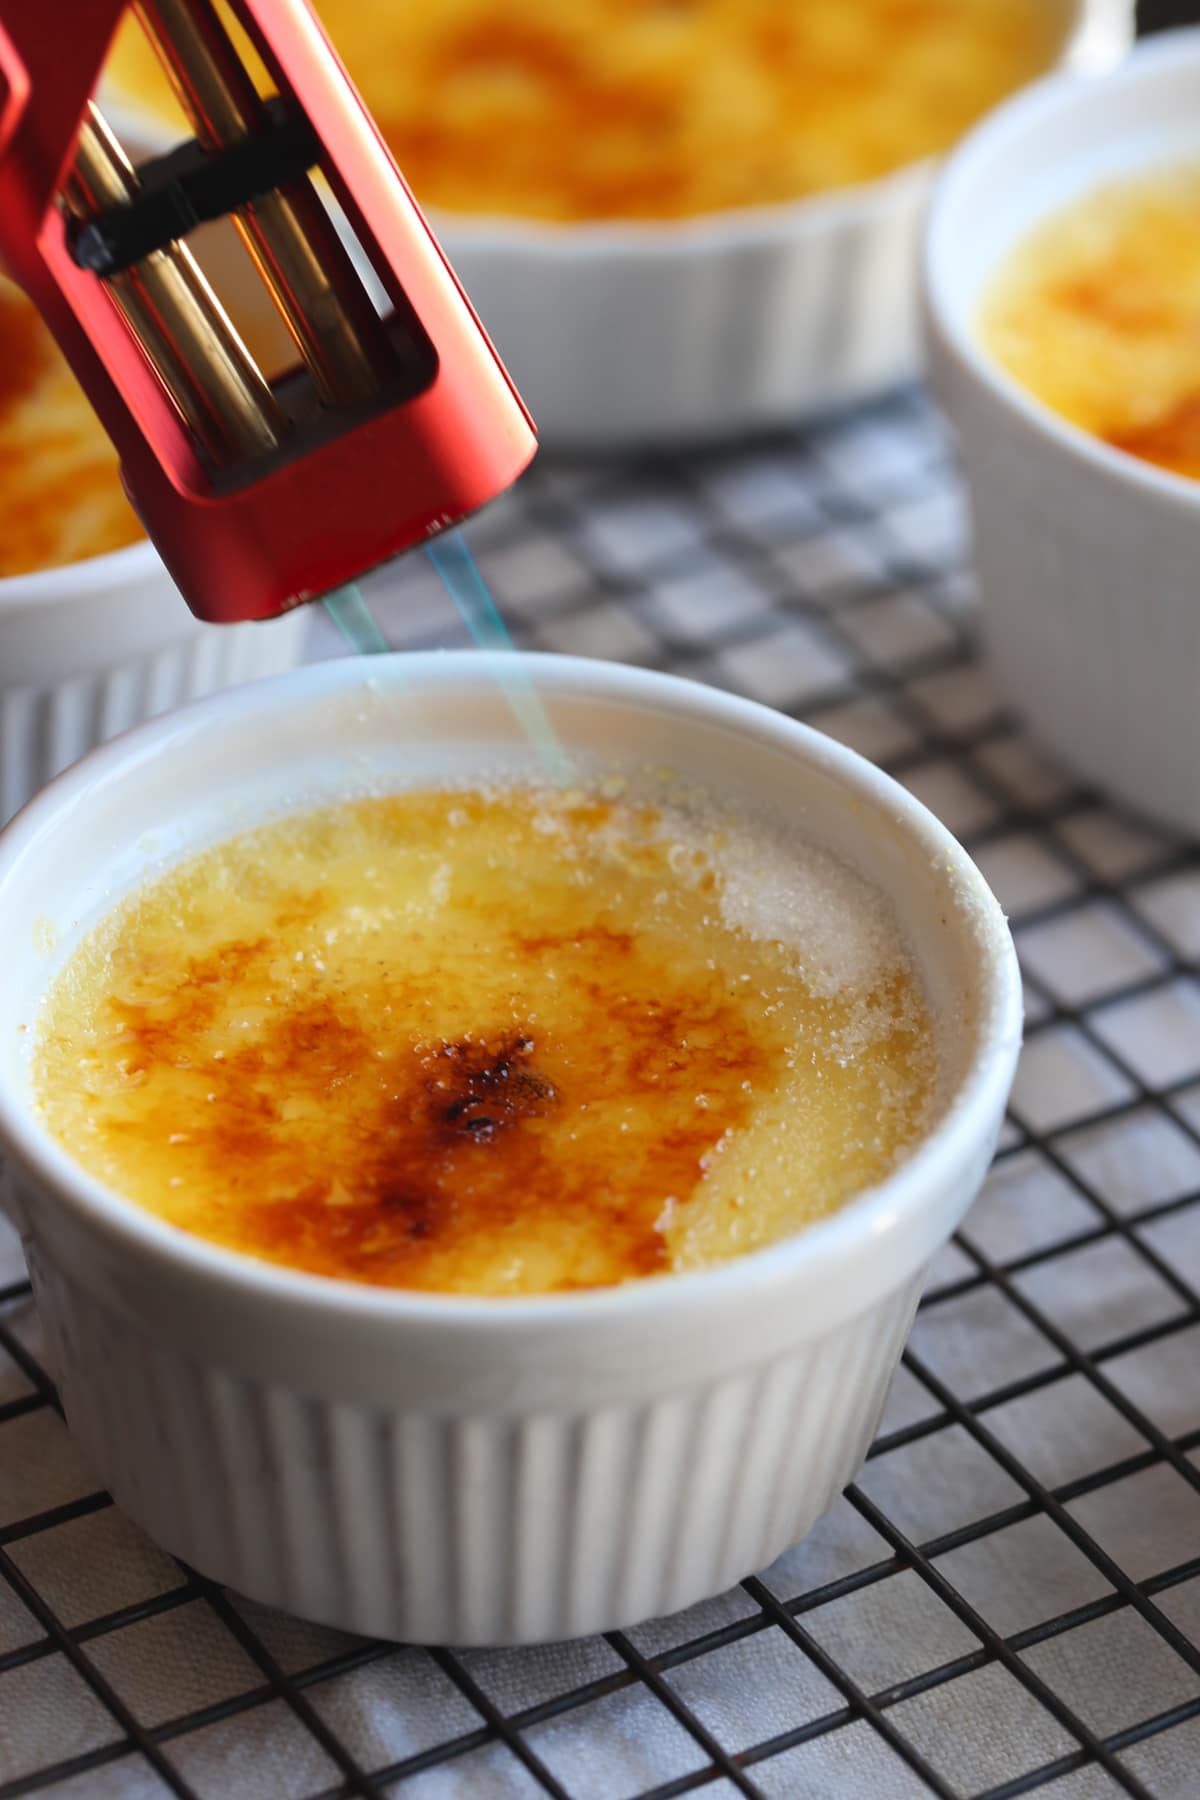 Using a kitchen torch to brûlée the sugar, melting it and caramelizing so it forms a crispy sugar top